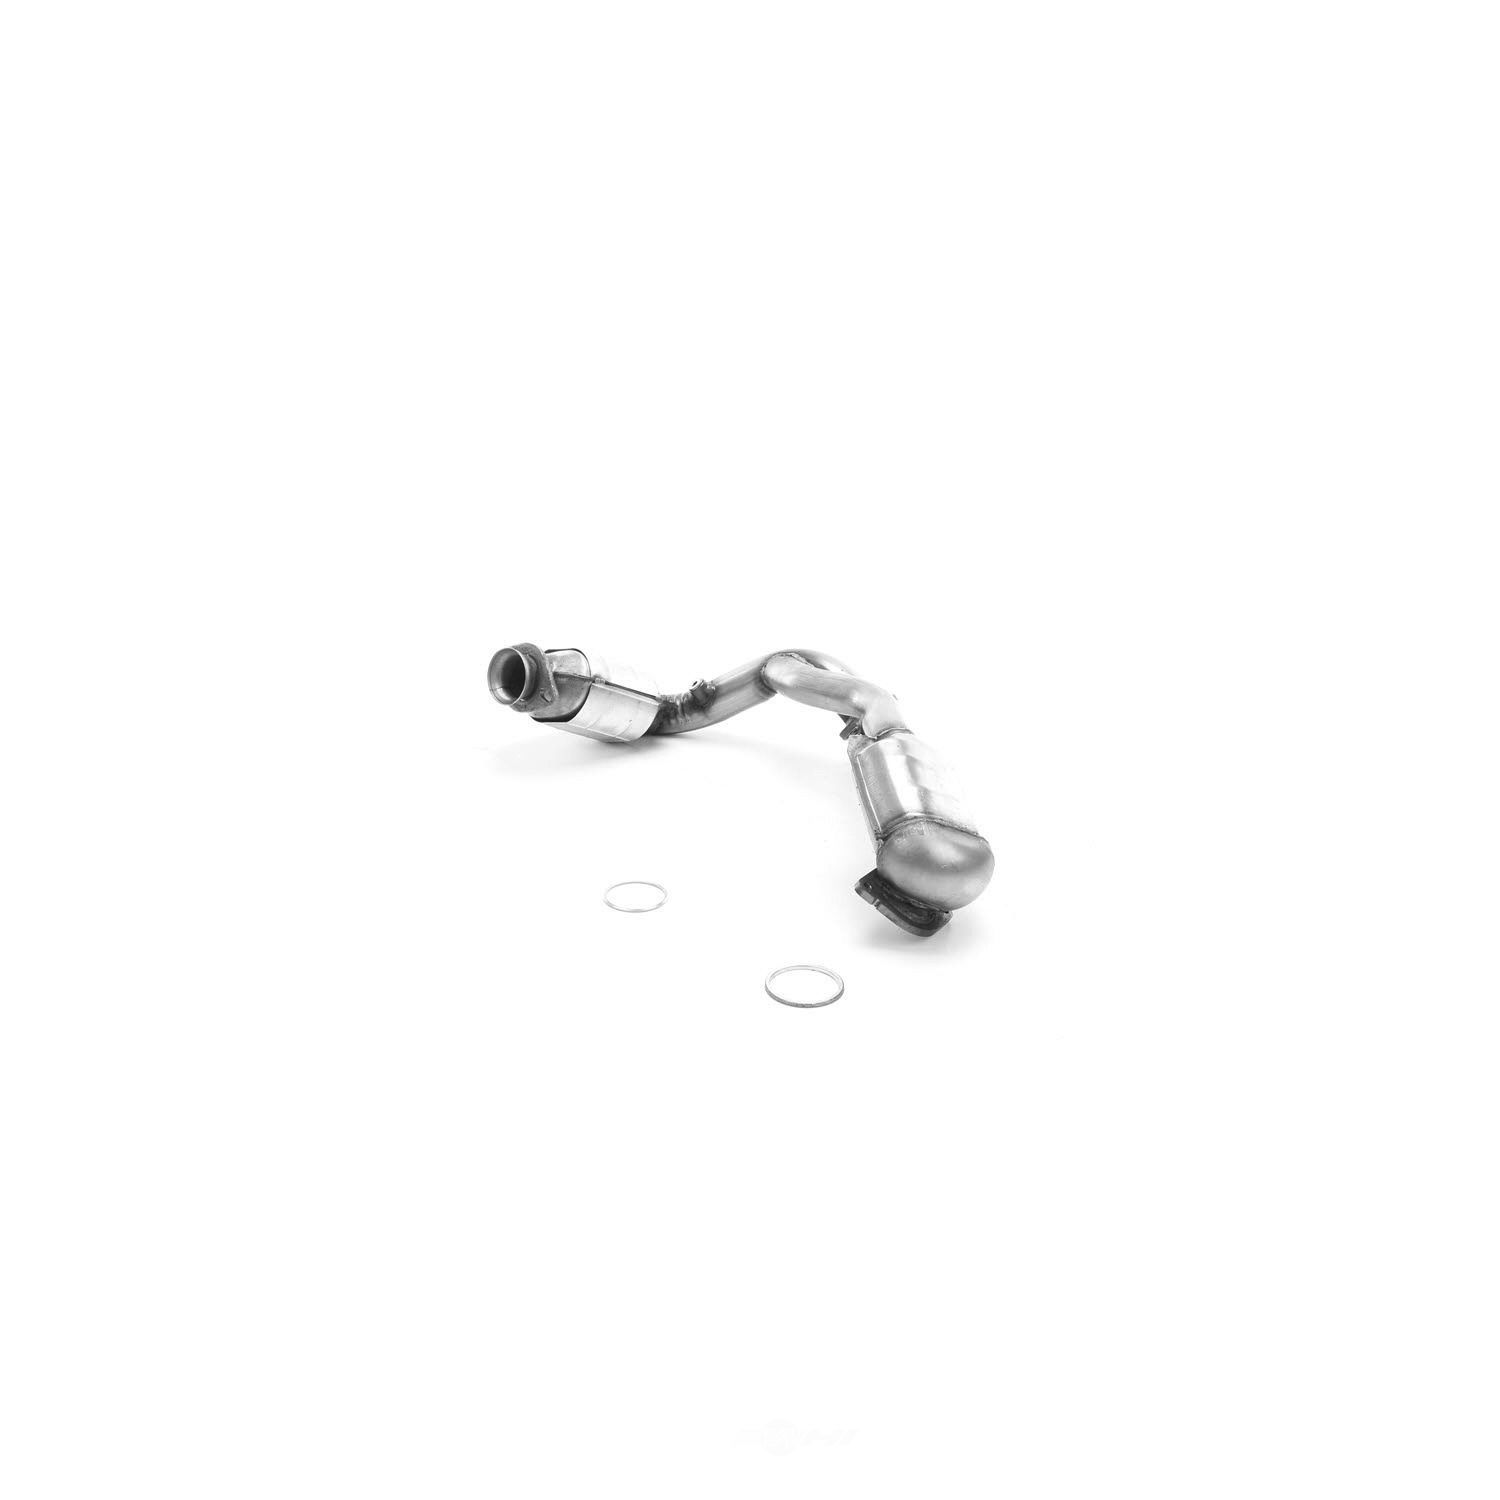 AP EXHAUST W/FEDERAL CONVERTER - Direct Fit Converter (Front) - APF 642696